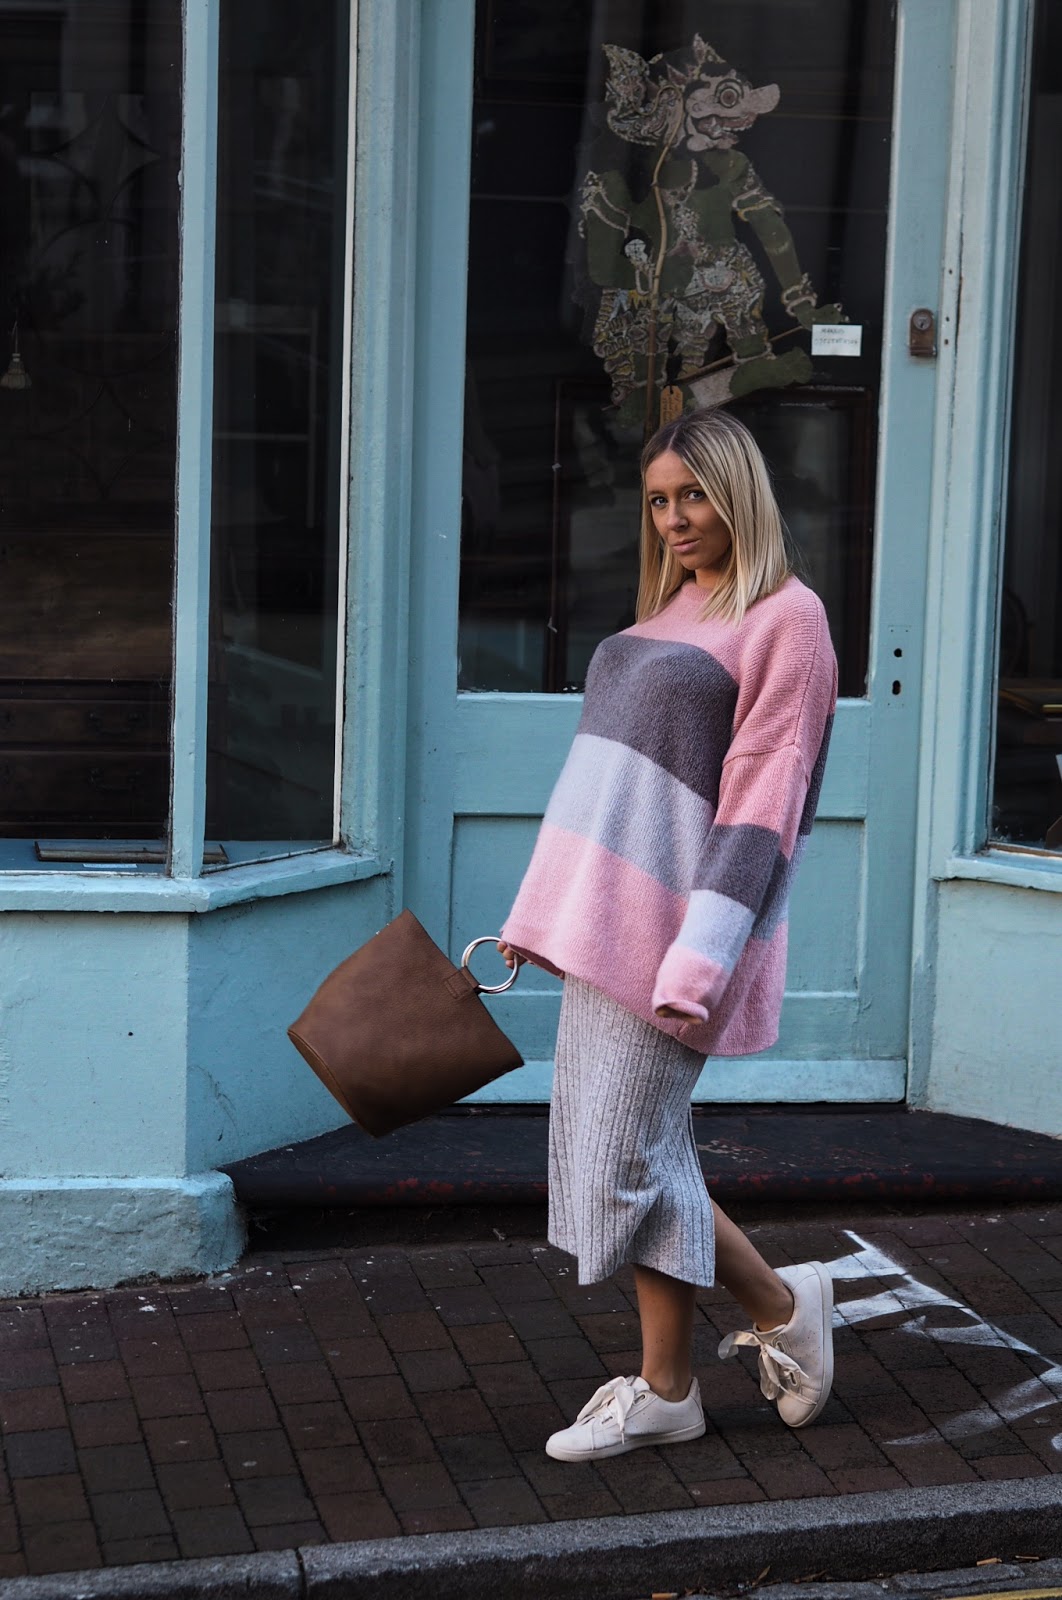 Top 5 Stripe Jumpers - Petite Side of Style